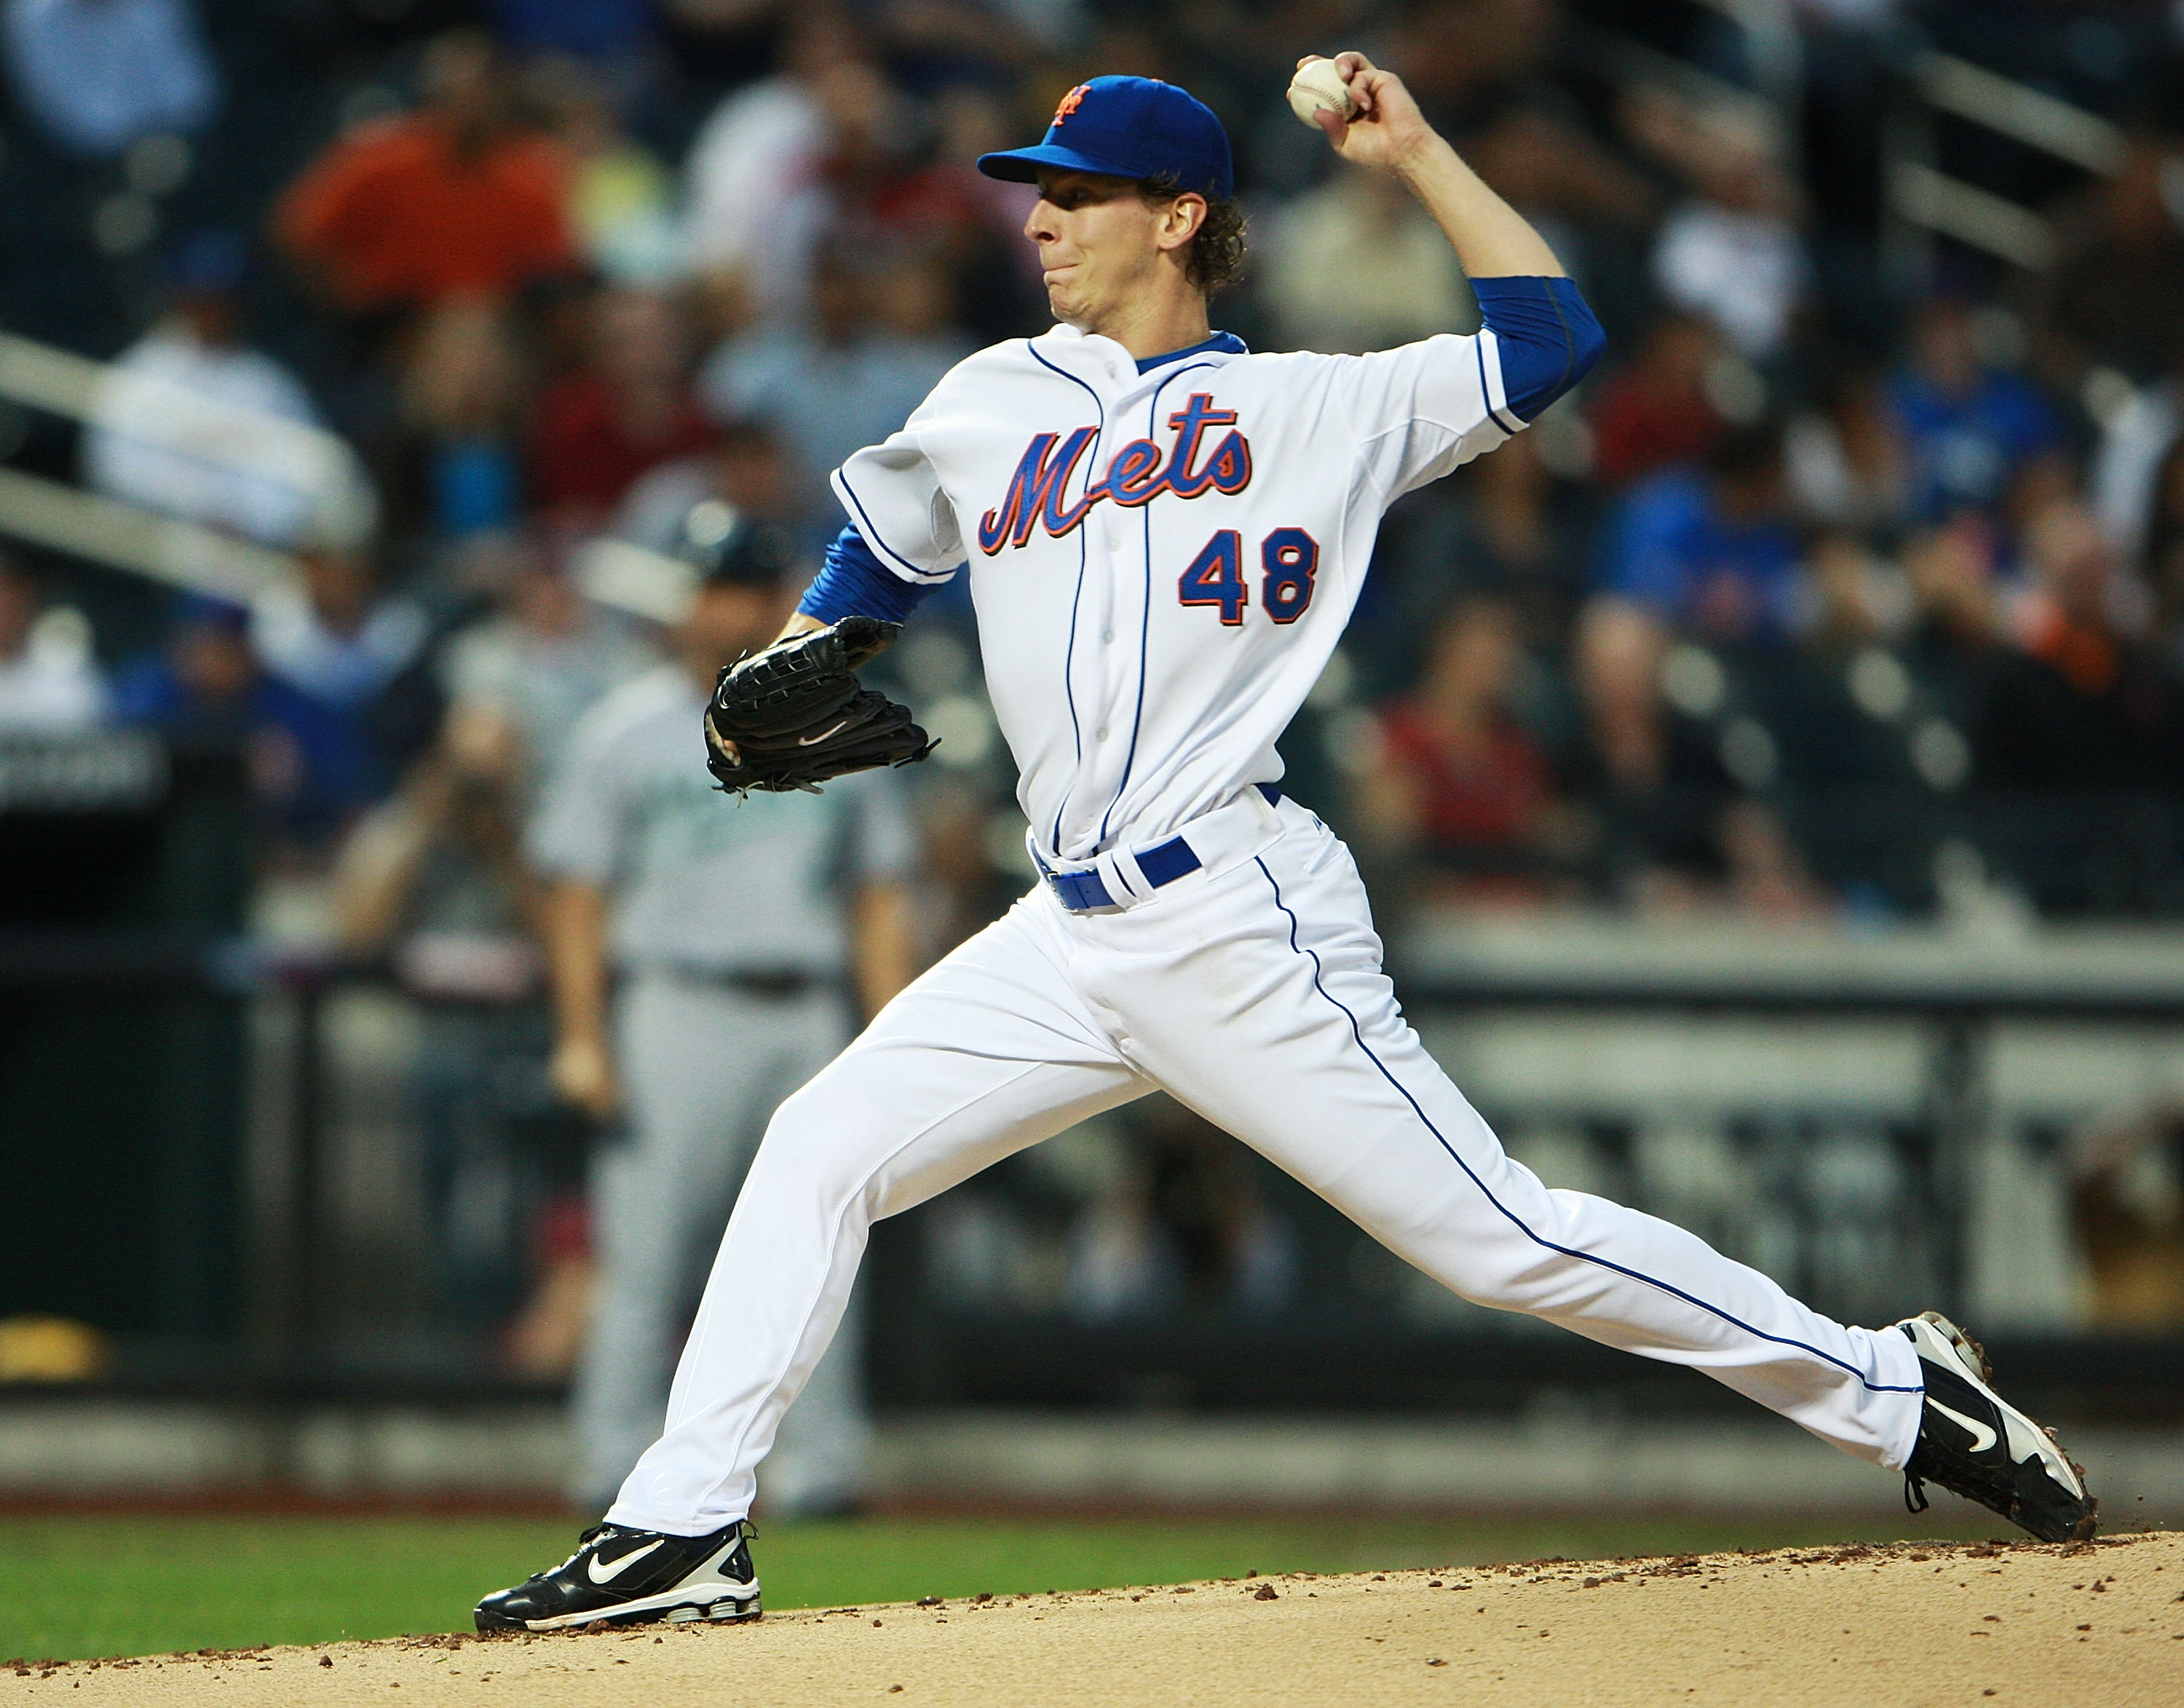 NEW YORK - AUGUST 25:  Pat Misch #48 of the New York Mets pitches against the Florida Marlins on August 25, 2010 at Citi Field in the Flushing neighborhood of the Queens borough of New York City.  (Photo by Andrew Burton/Getty Images)